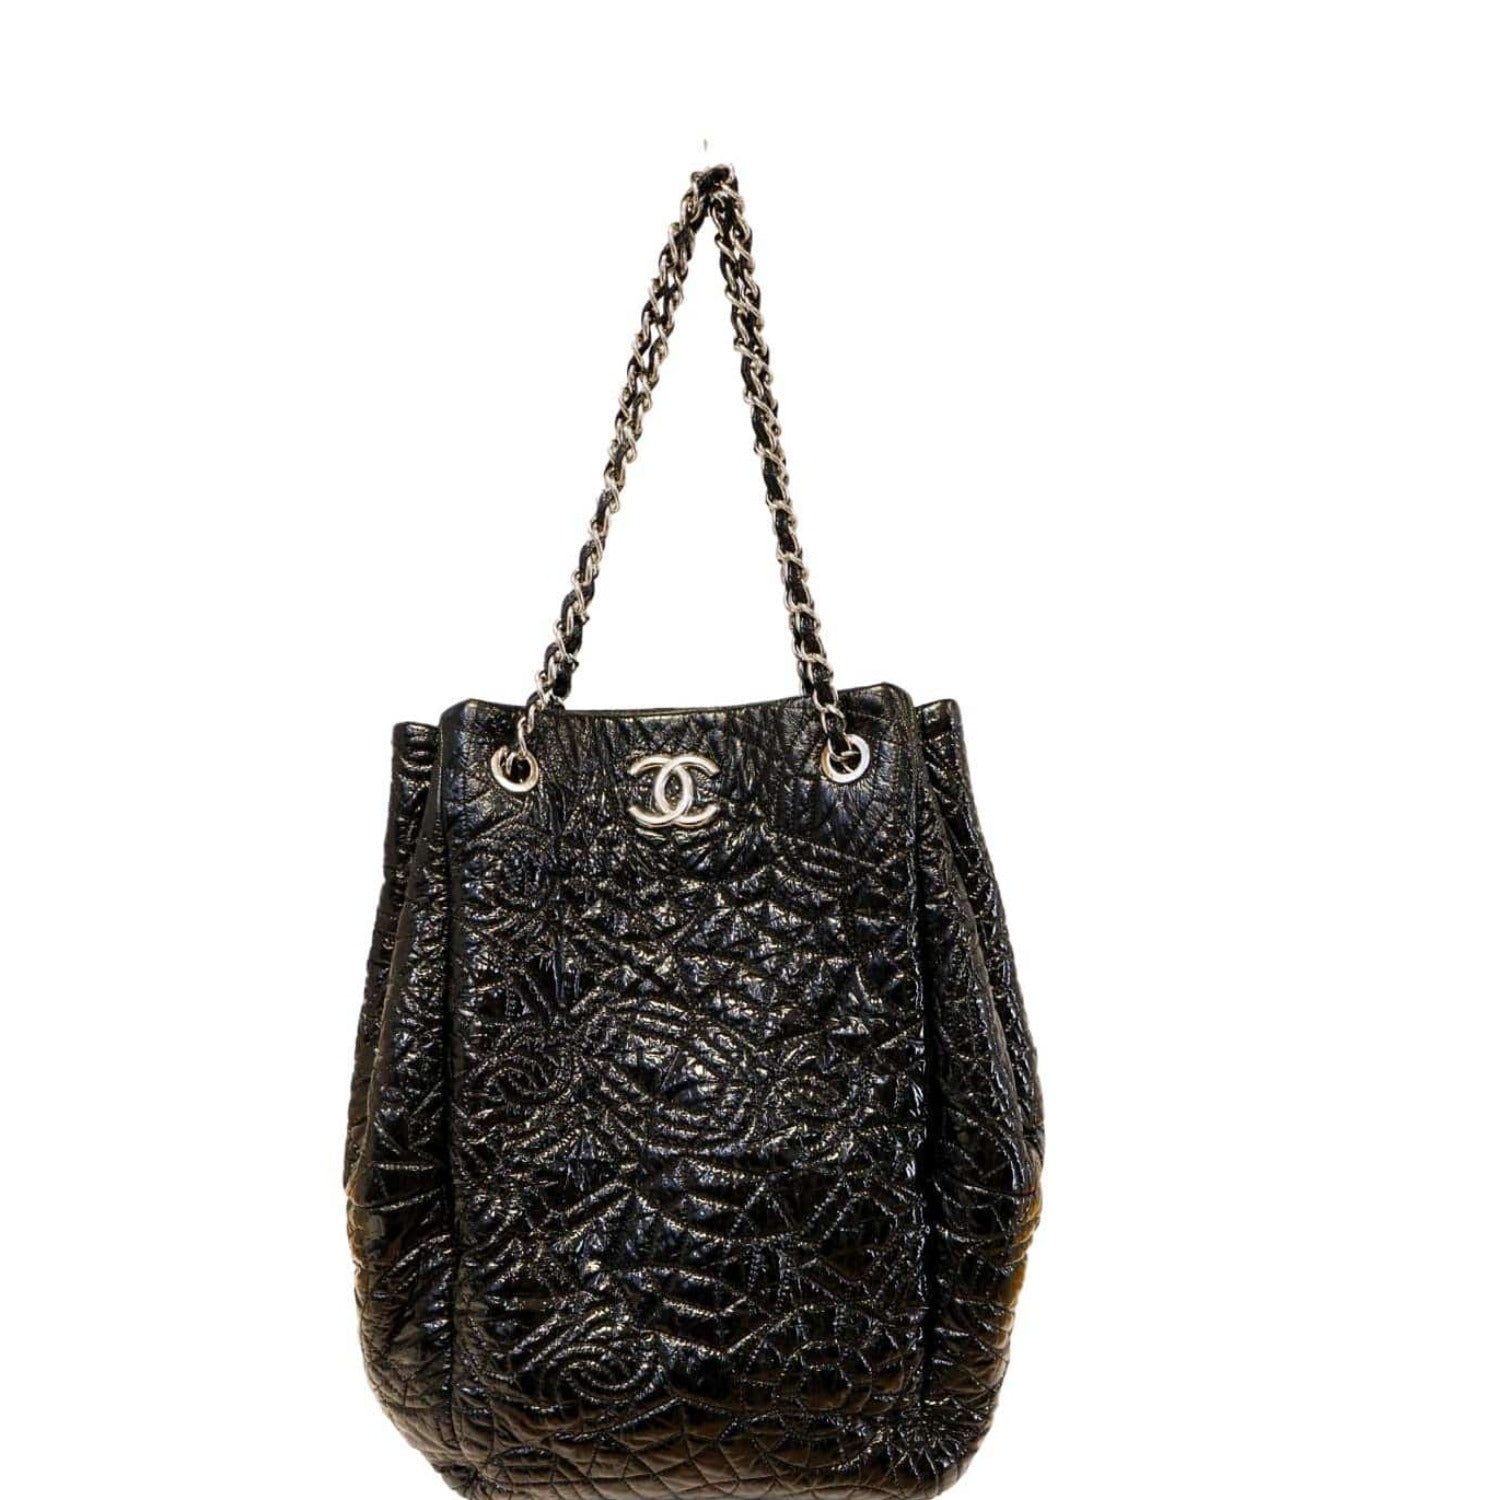 CHANEL Camellia Quilted Leather Chain Belt Bag Black